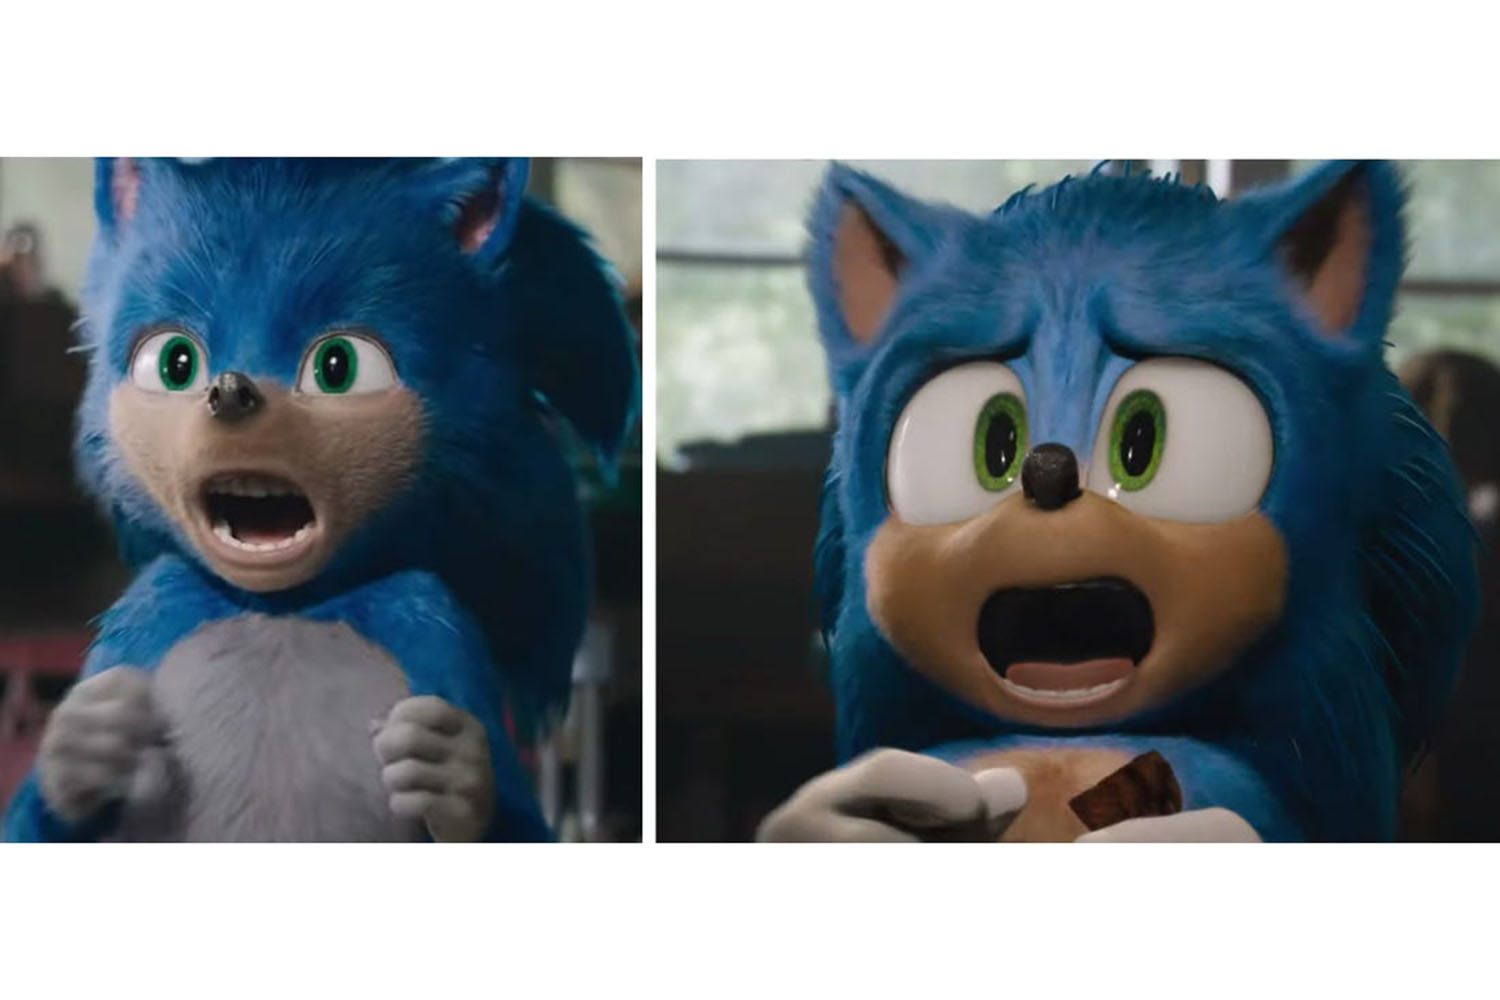 Sonic movie: New trailer shows redesigned hedgehog after fan